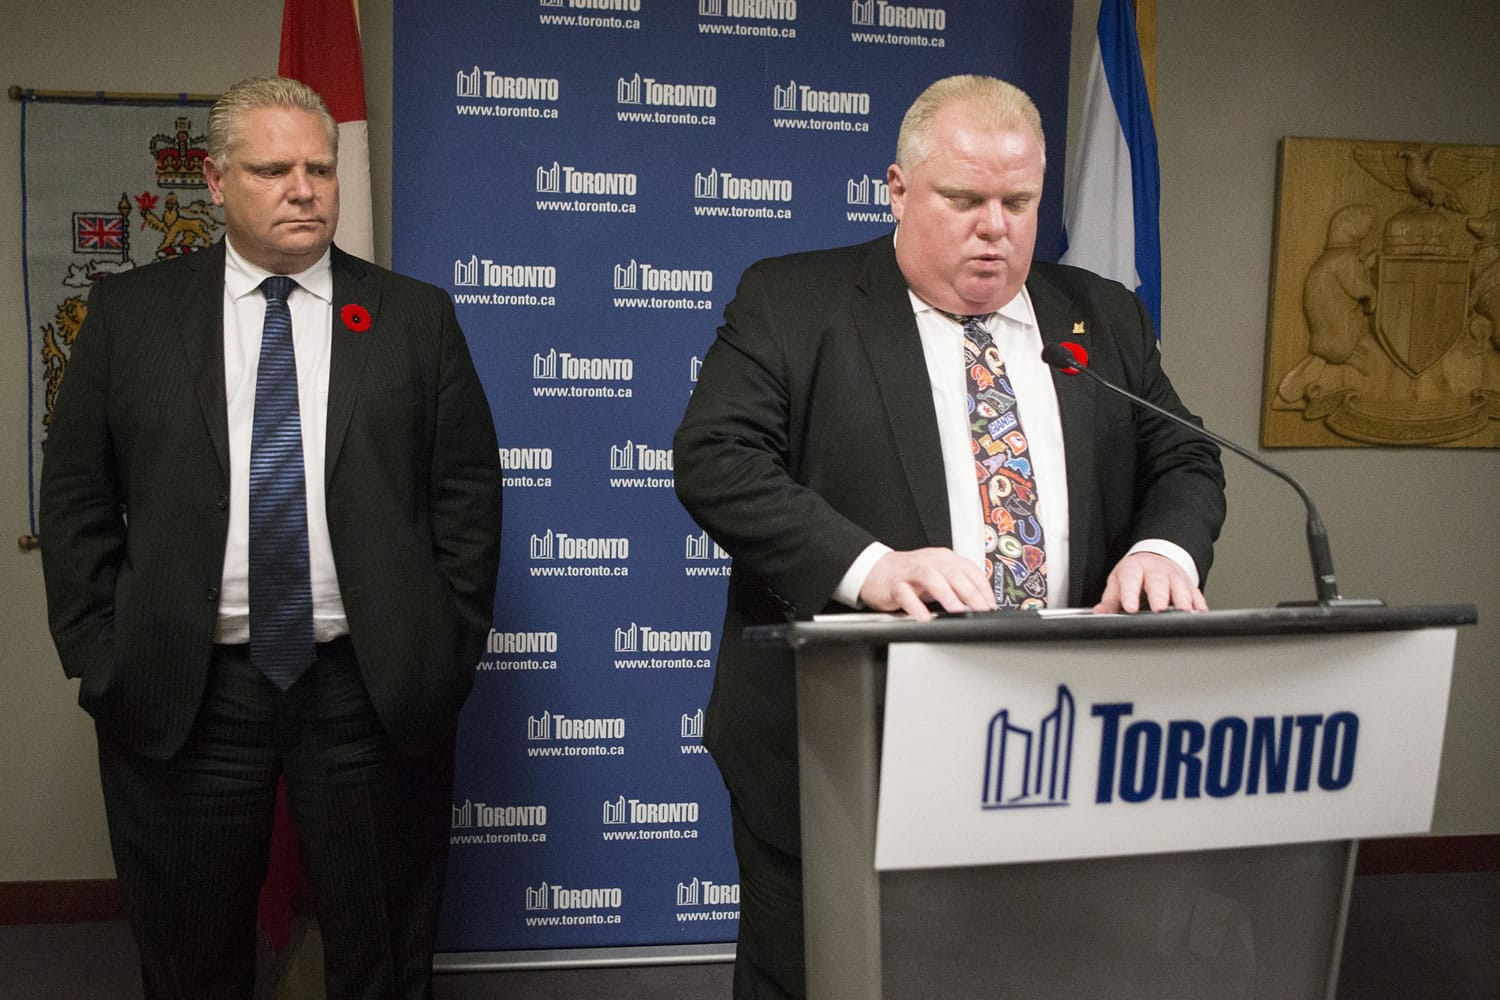 Toronto Mayor Rob Ford addresses the media at City Hall as his brother city councillor Doug Ford, left, looks on Tuesday in Toronto.